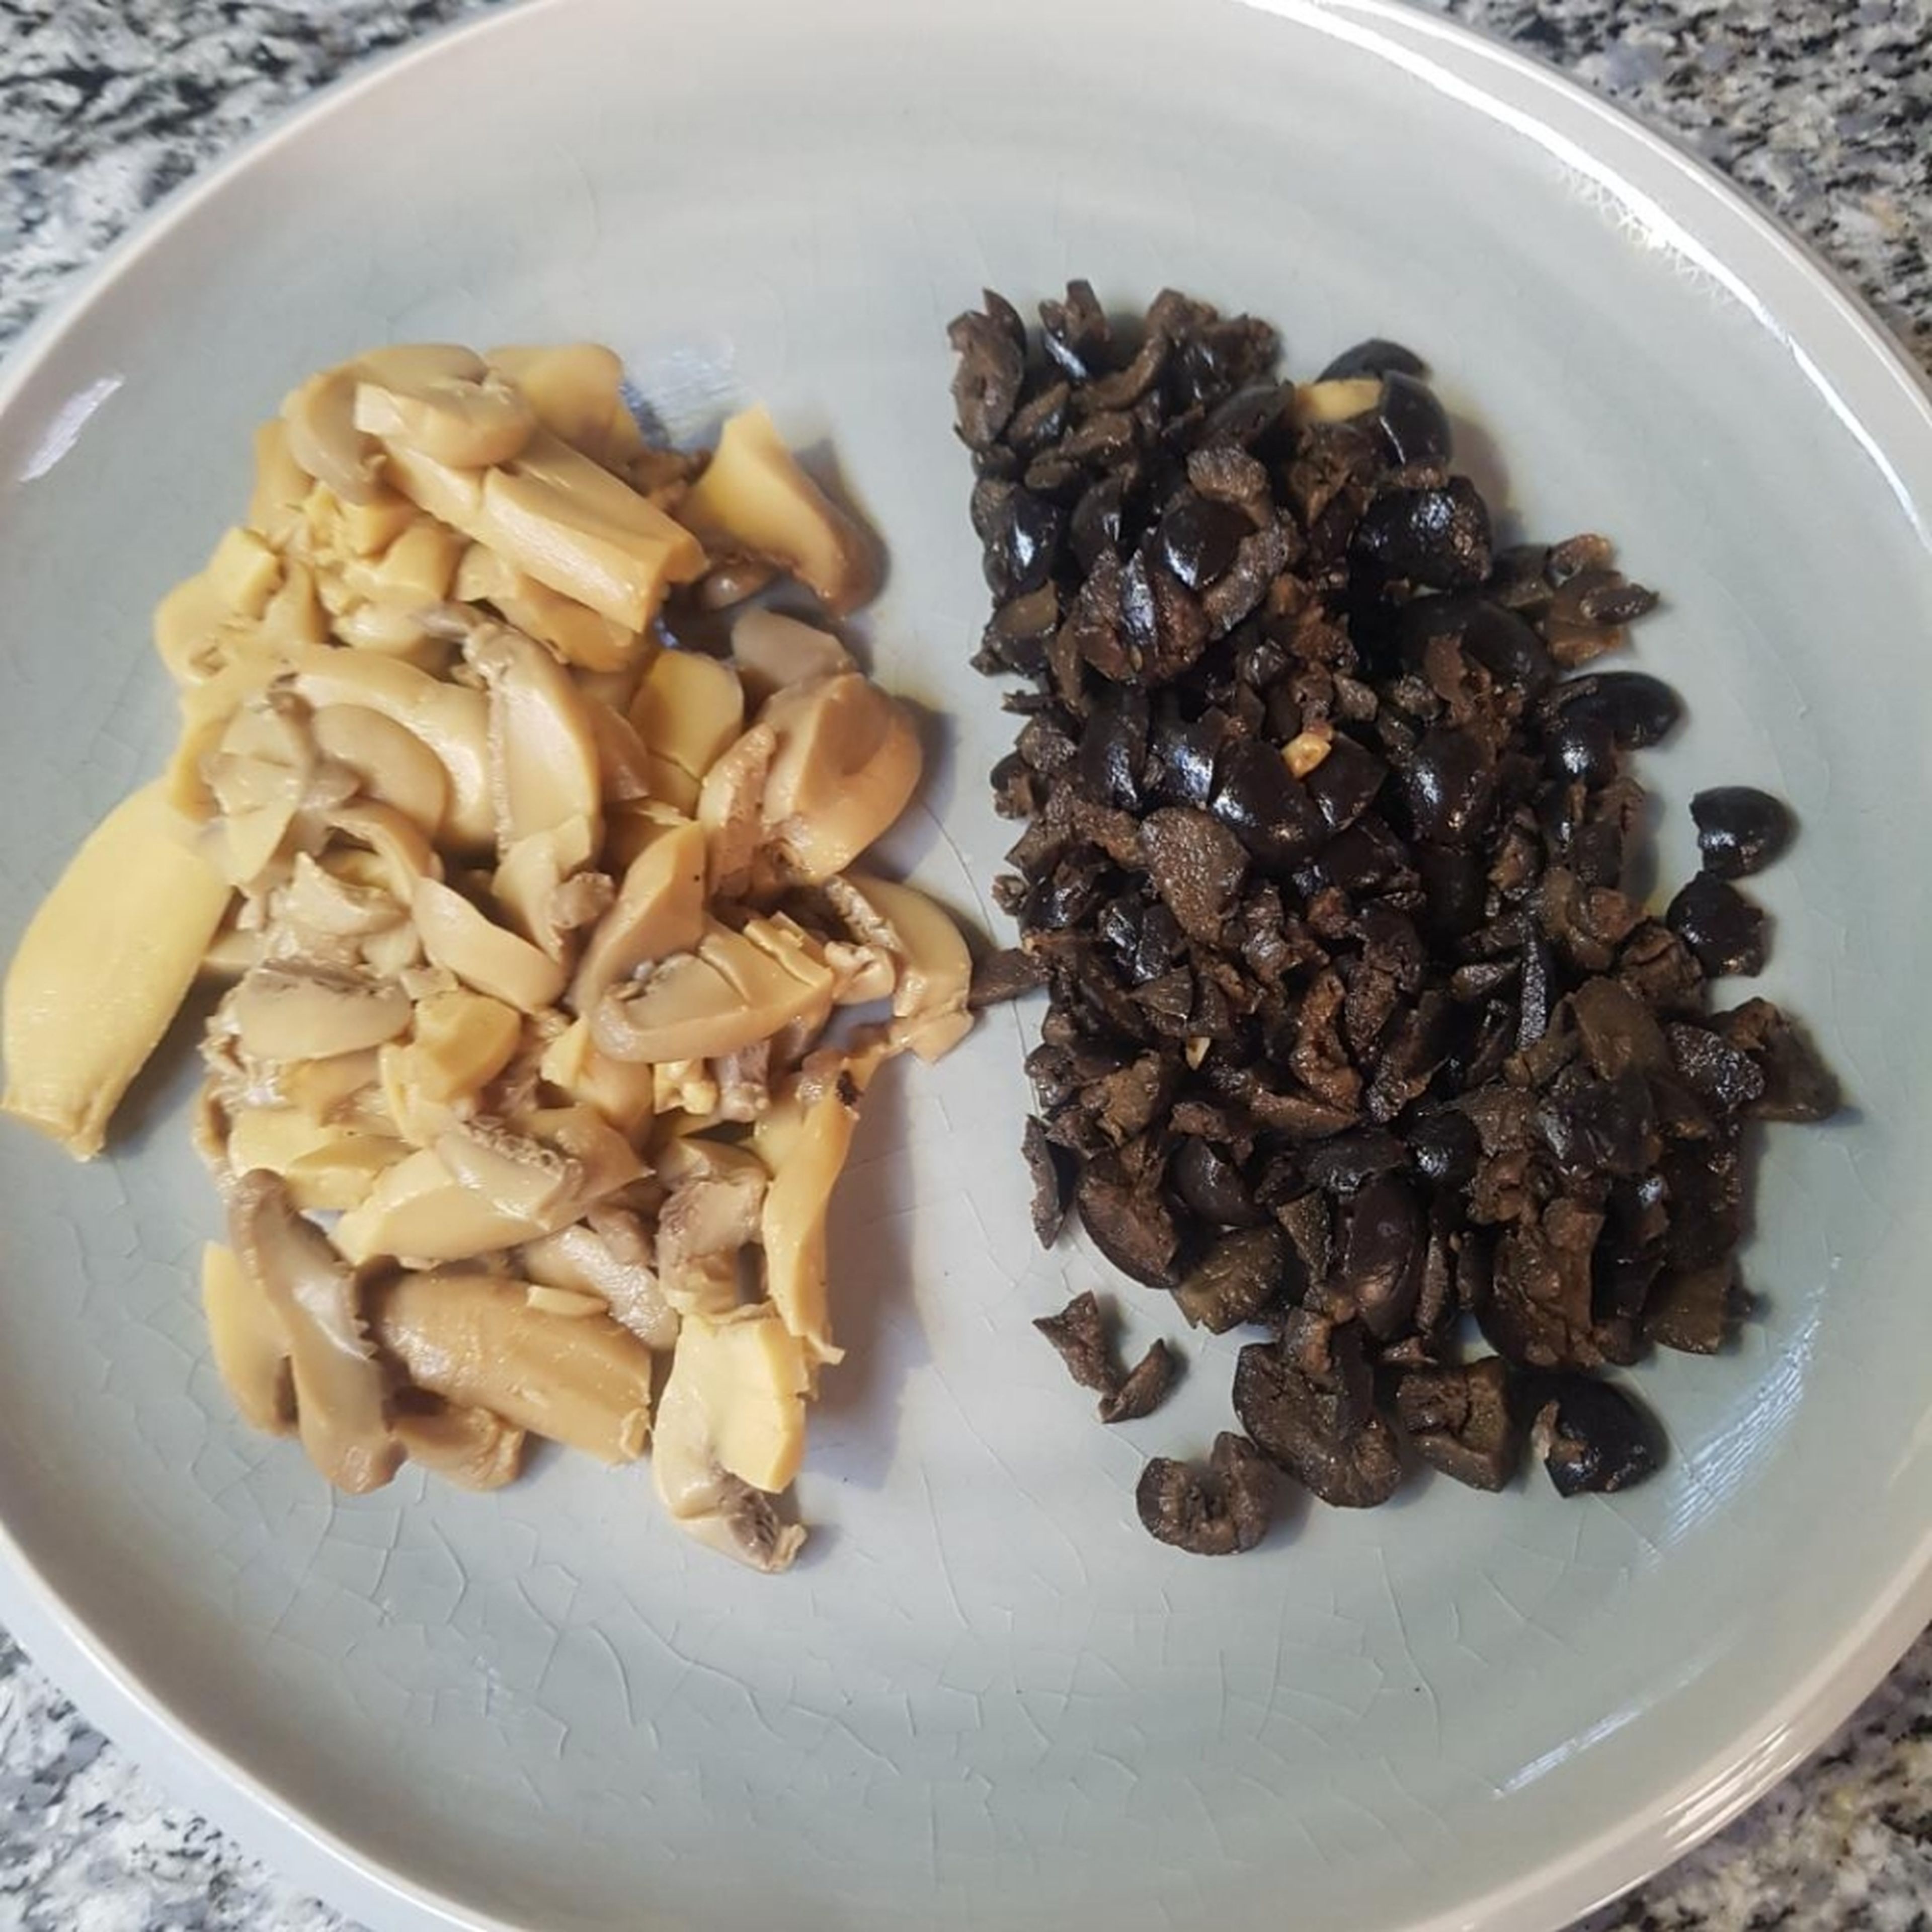 Mix the mushrooms with the black olives